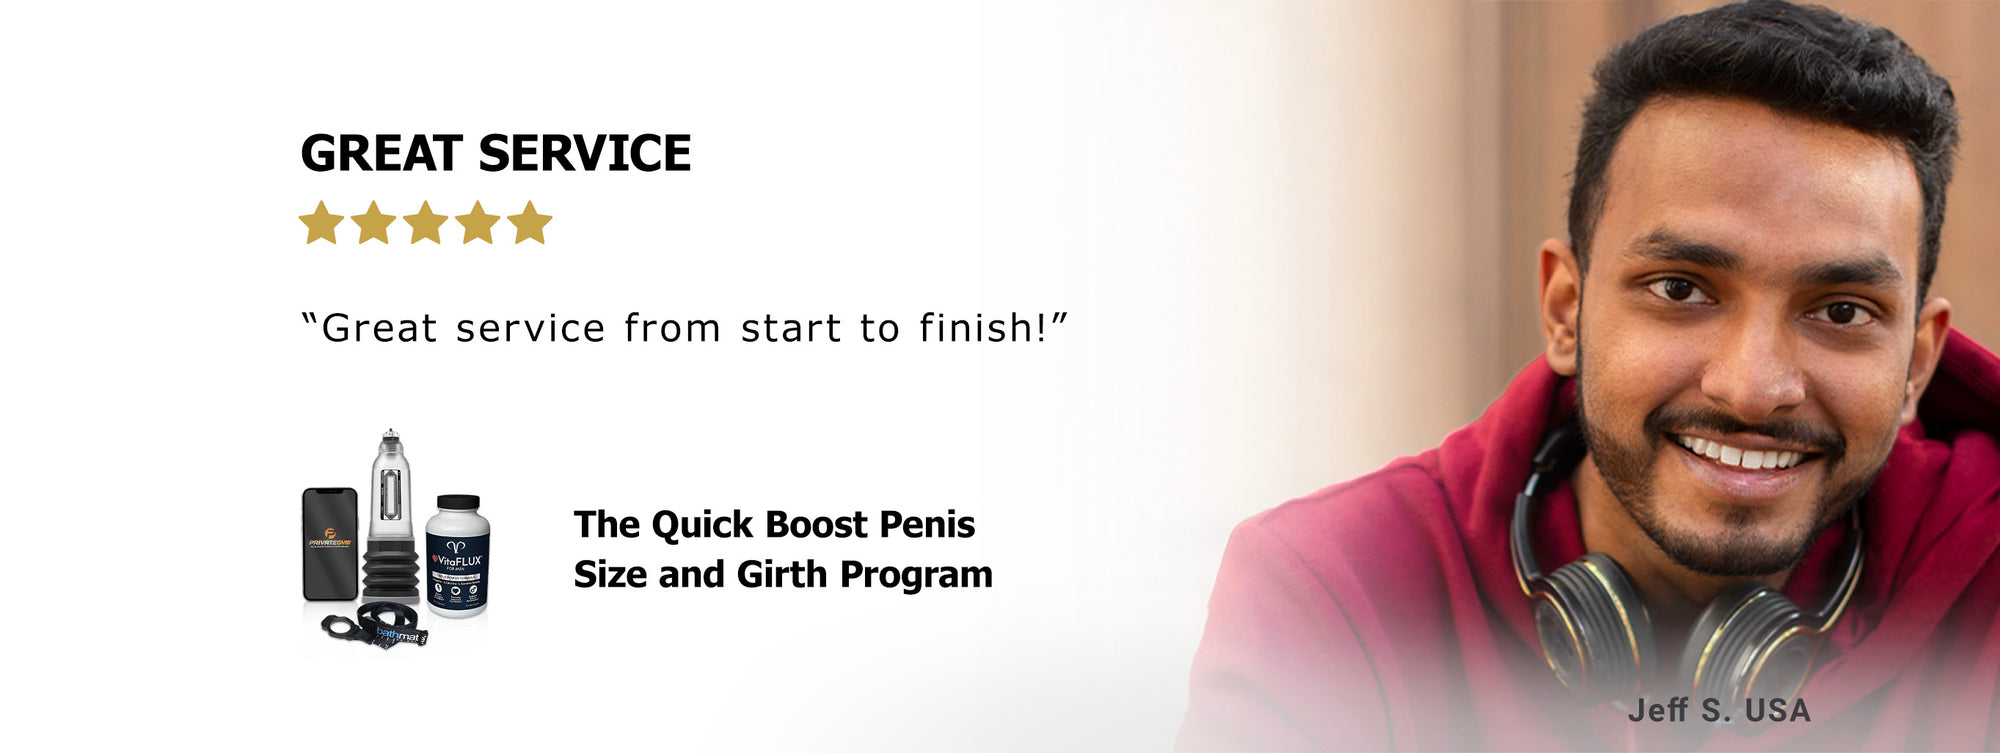 Testimonial Rating for The Quick Boost Penis Size and Girth Program Desktop